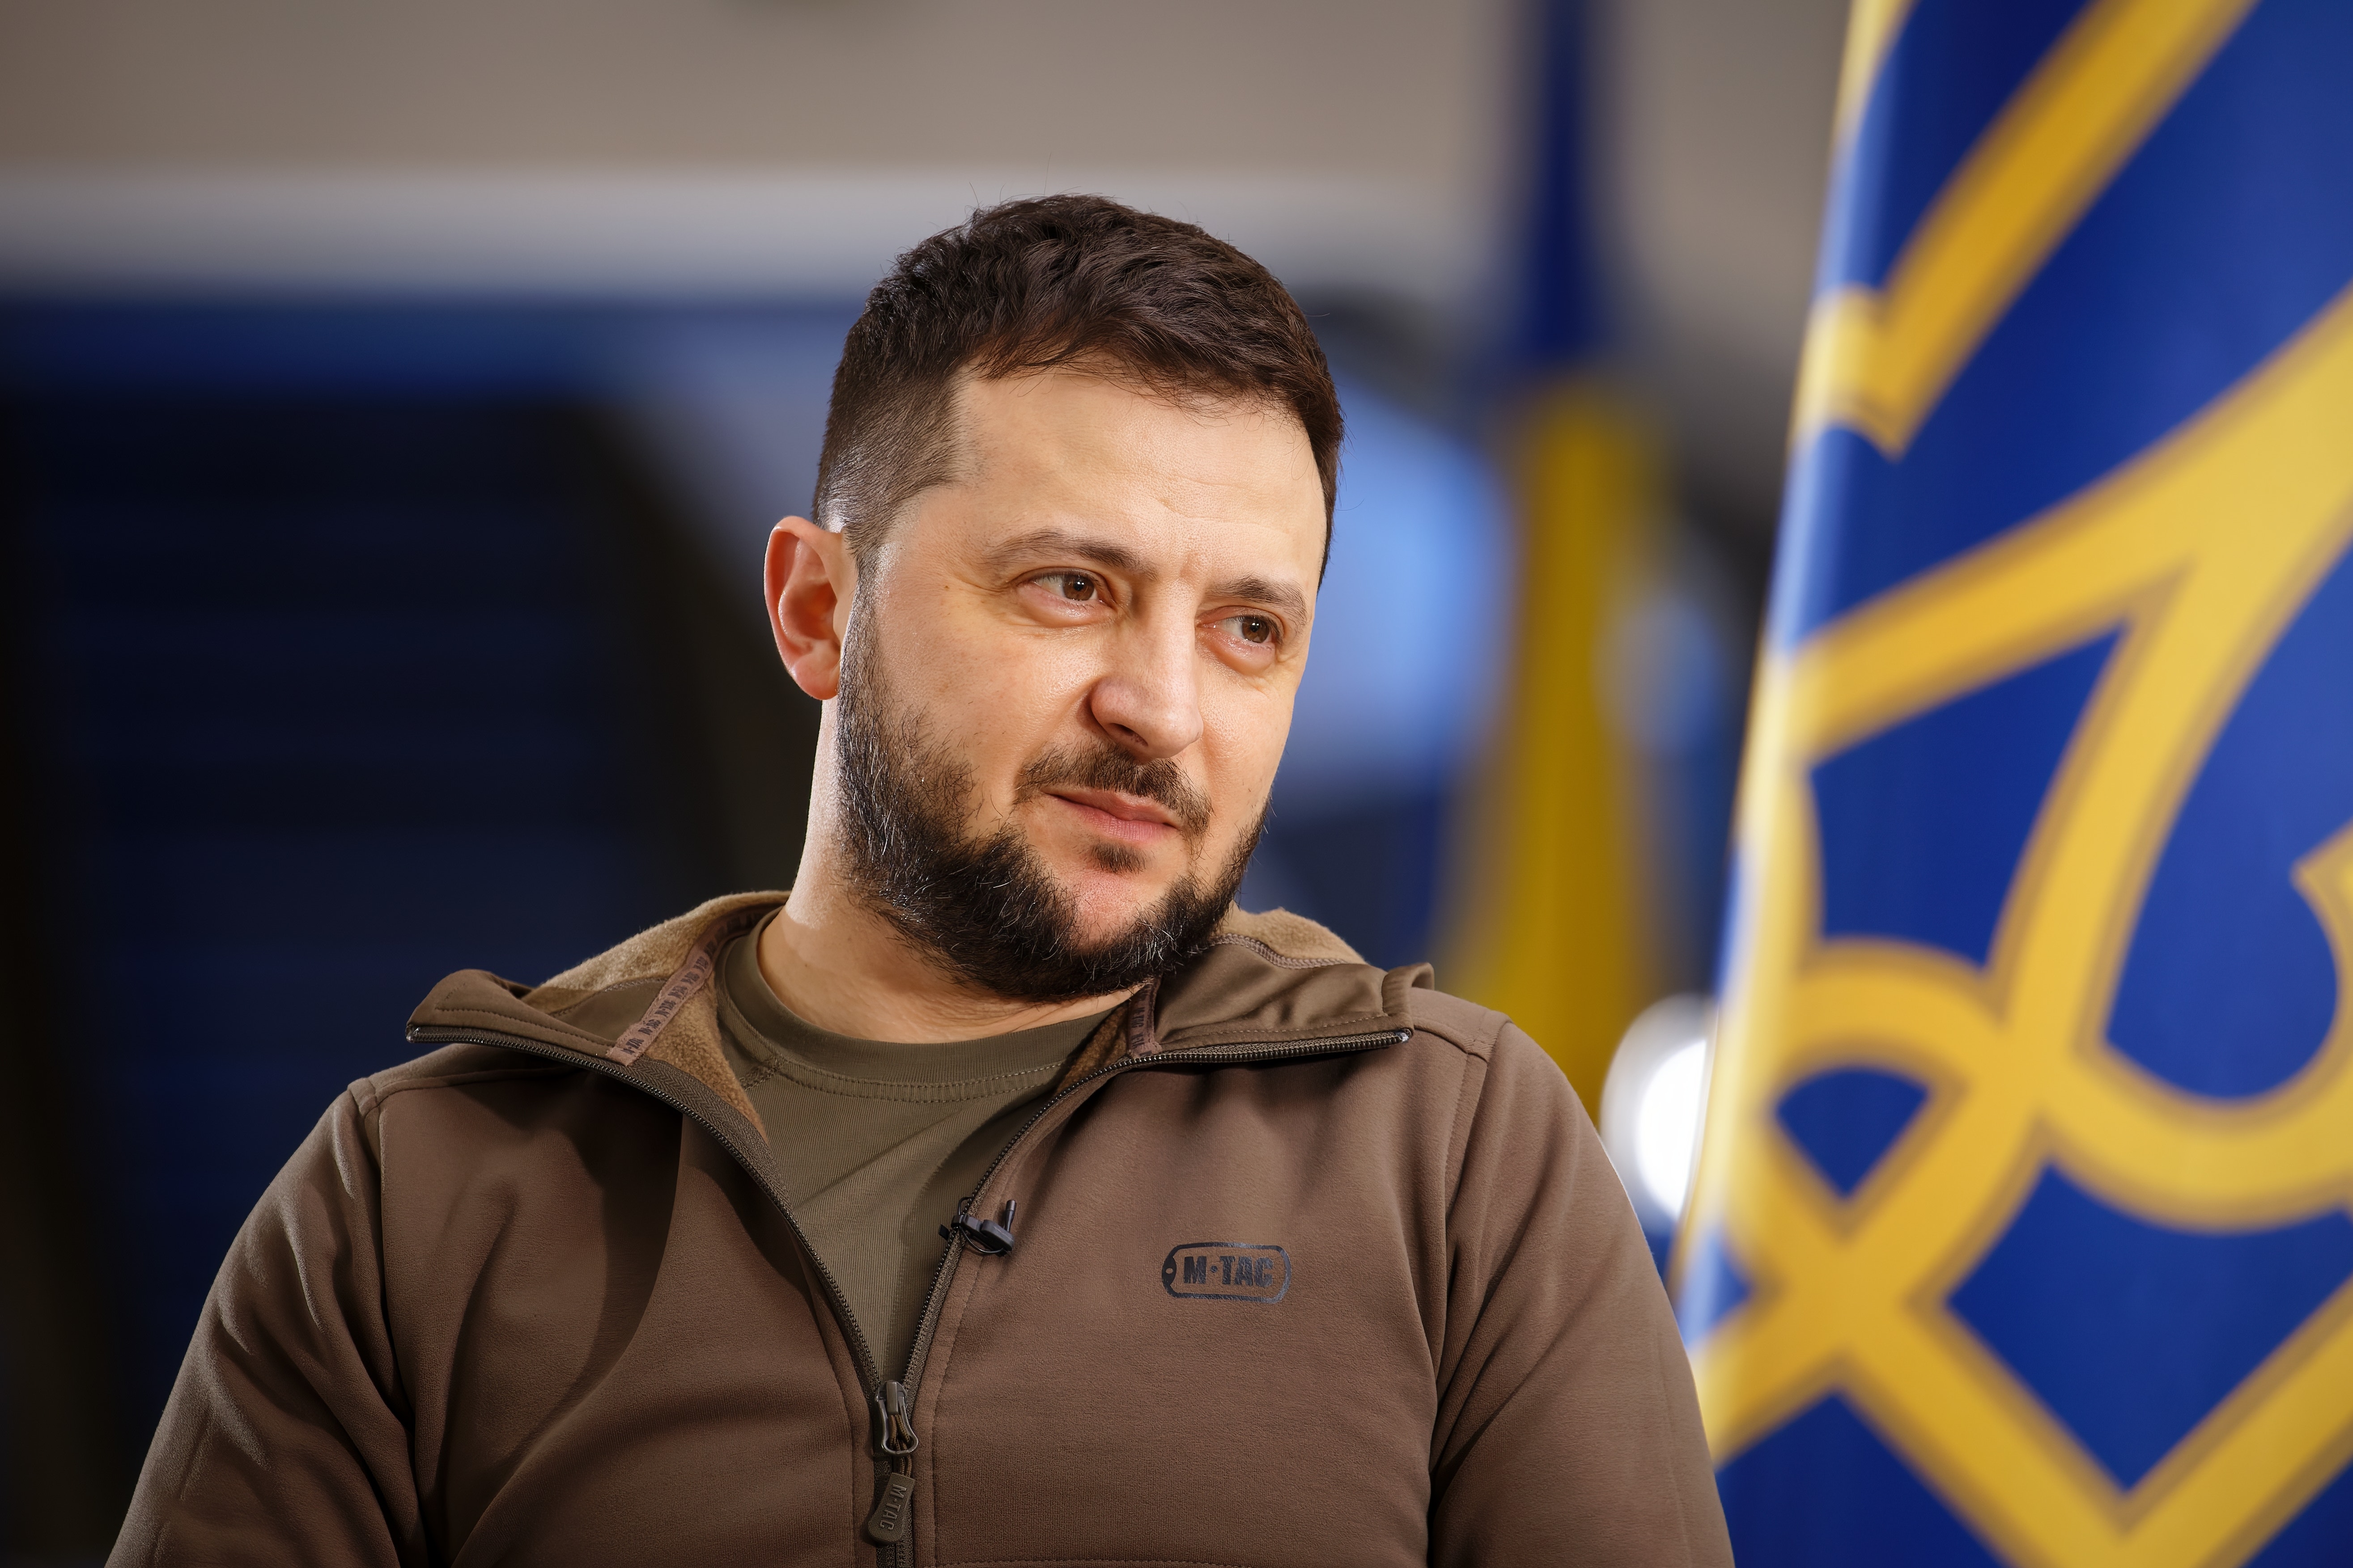 Ukrainian President Zelenskyy Escapes Serious Injuries In Kyiv Car Accident